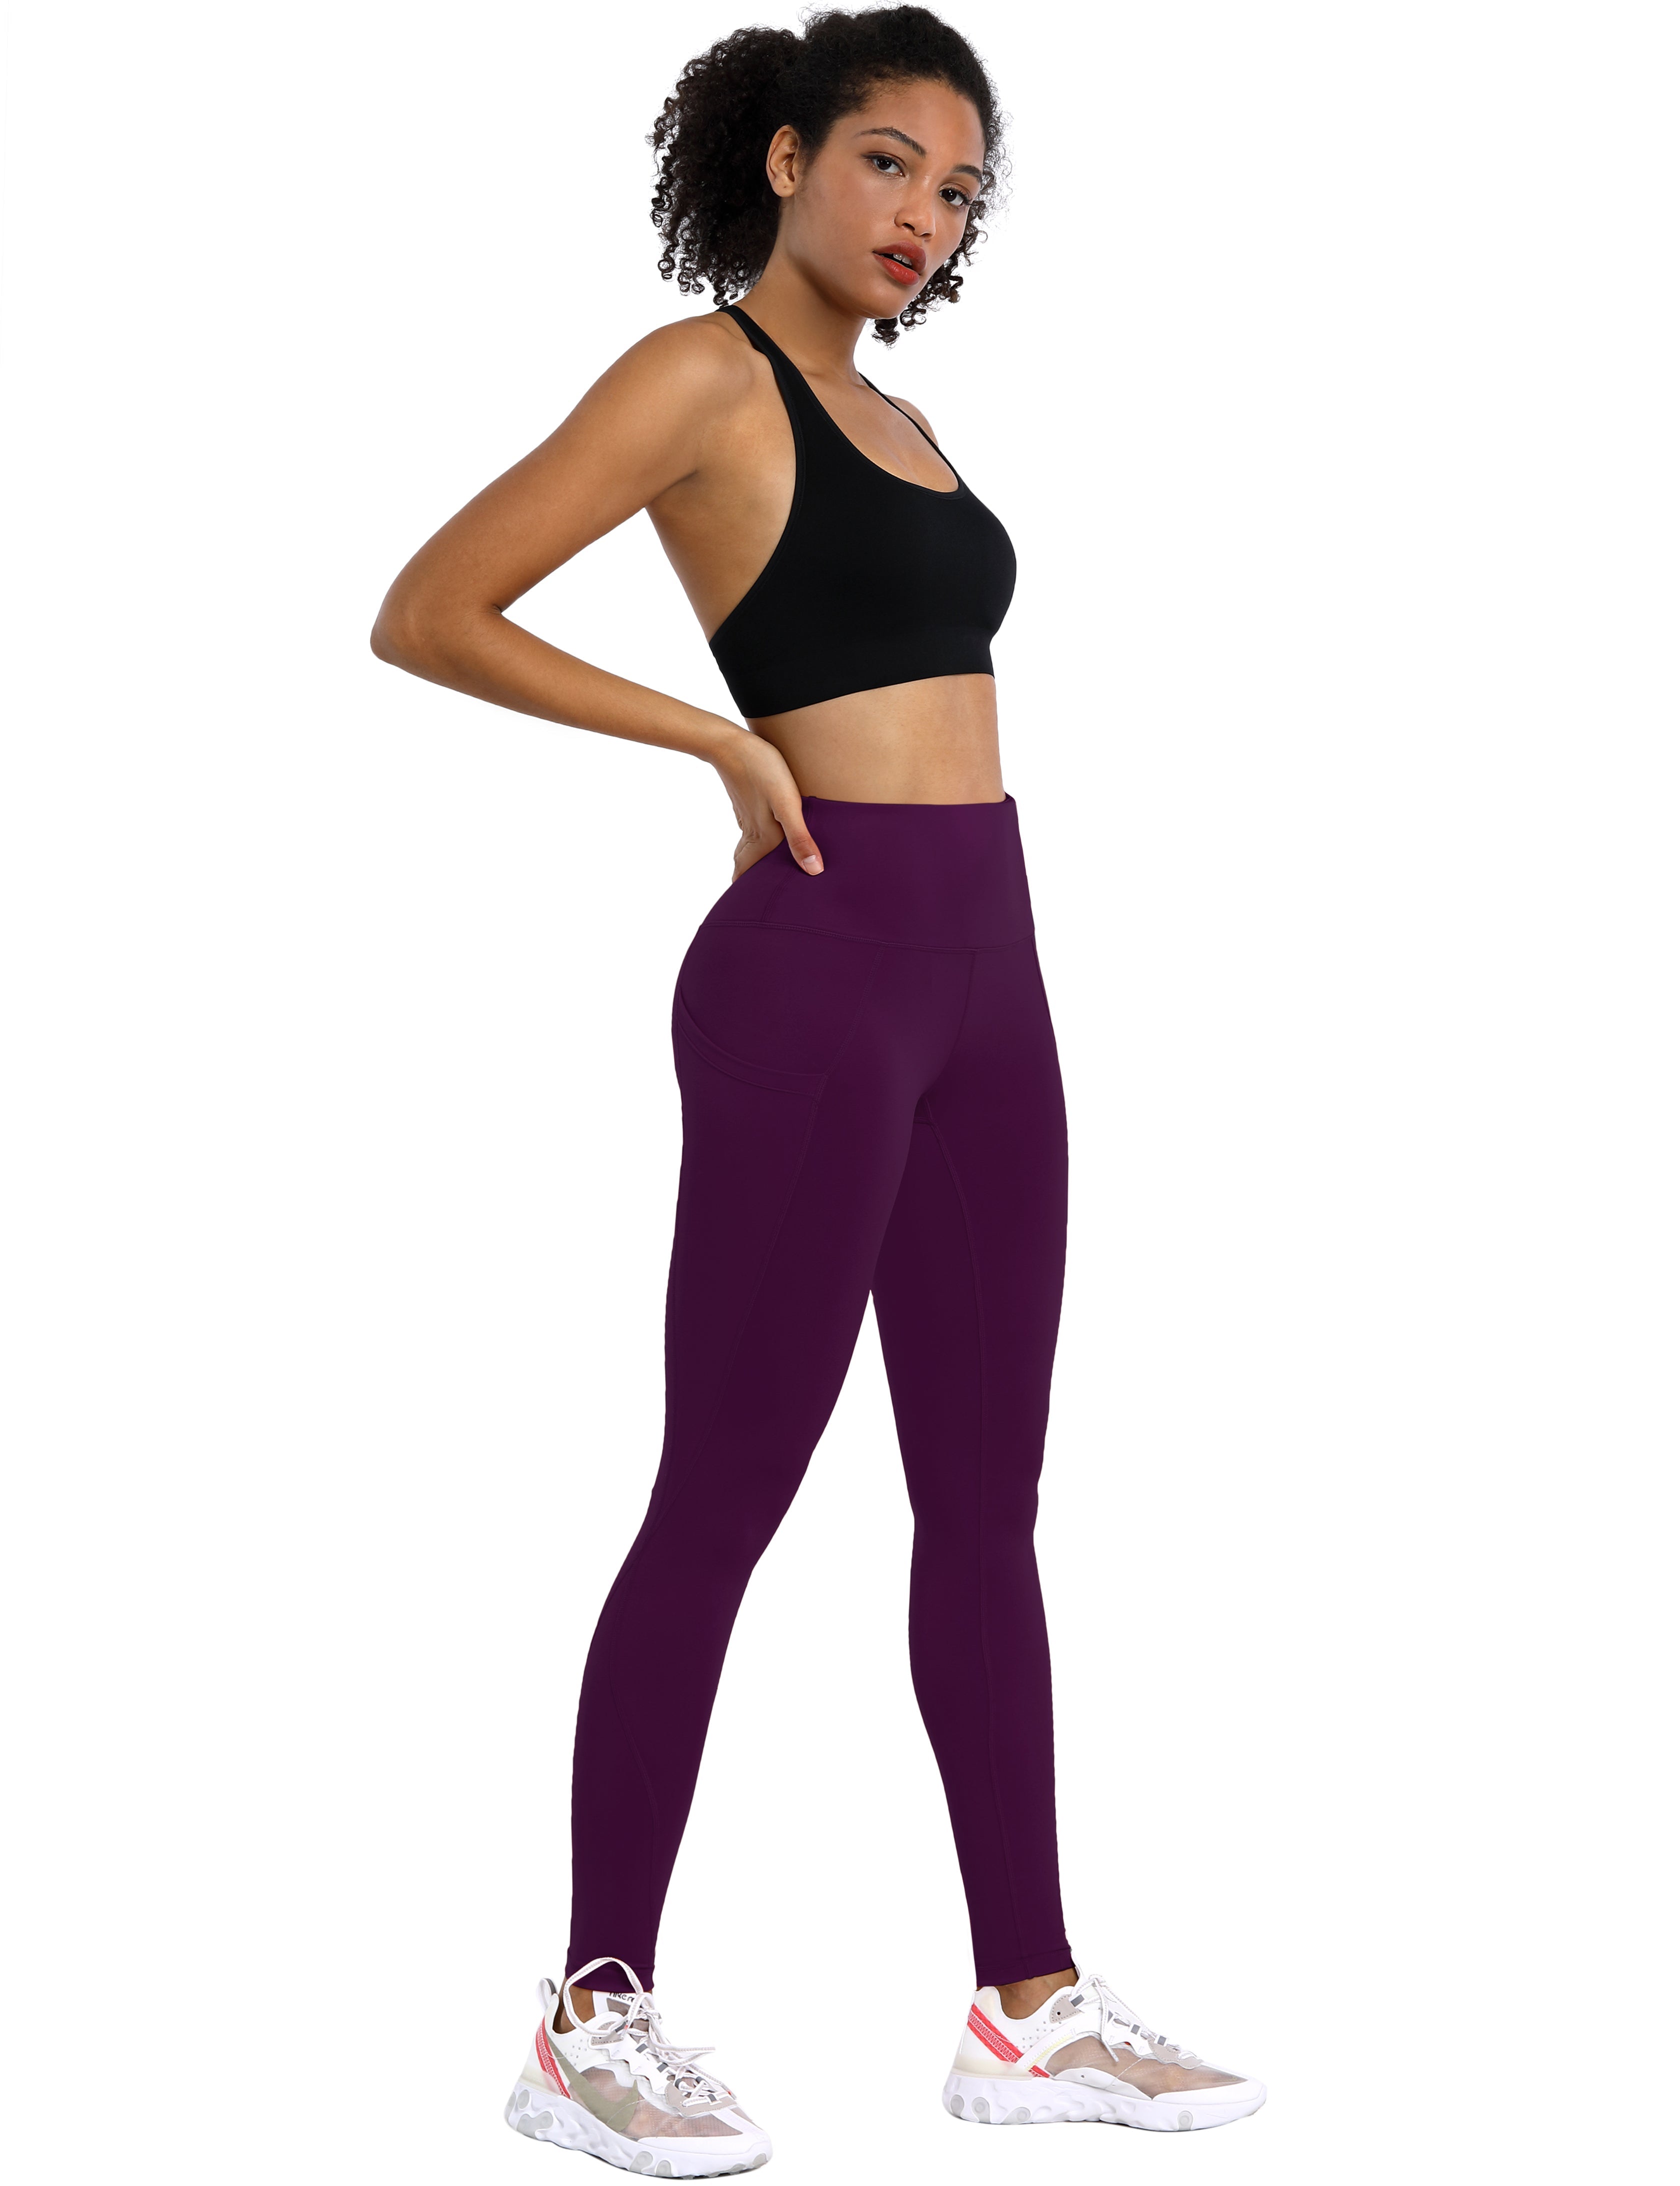 High Waist Side Pockets Golf Pants plum 75% Nylon, 25% Spandex Fabric doesn't attract lint easily 4-way stretch No see-through Moisture-wicking Tummy control Inner pocket